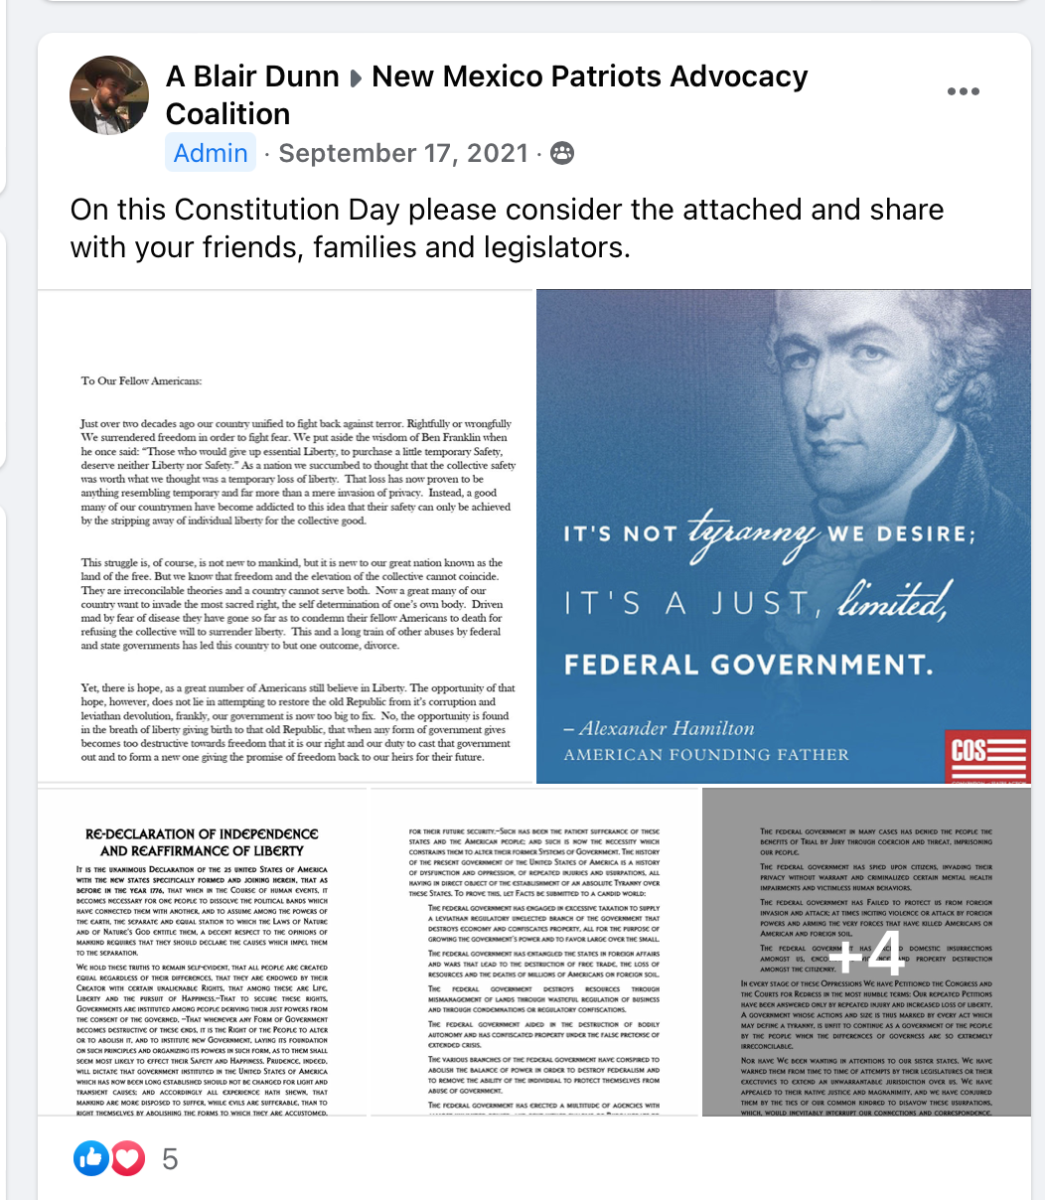 A screen capture of a post in the New Mexico Patriots Facebook page containing a number of images of documents referring to a new constitution for the US.